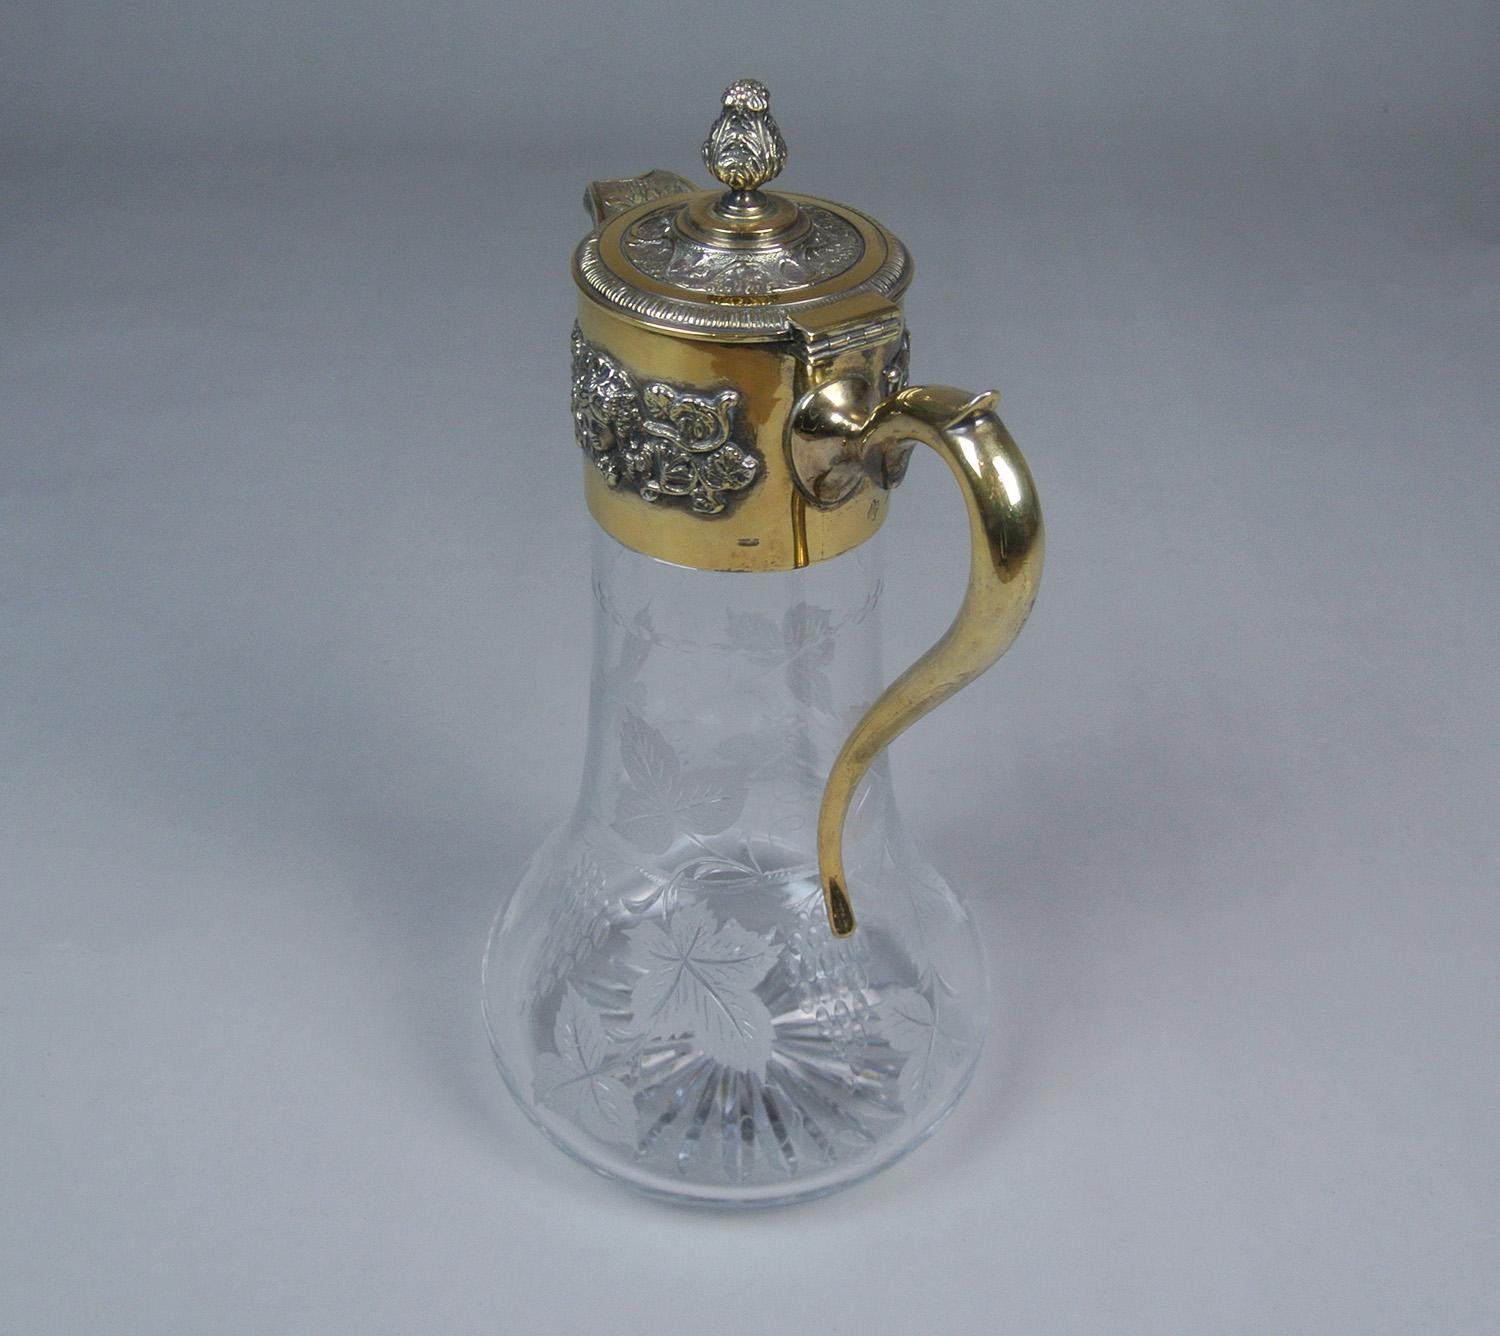 Superb Quality Silver Asprey and Co. Ltd Bacchus Mask Claret Jug - 1960 In Good Condition For Sale In Heathfield, GB